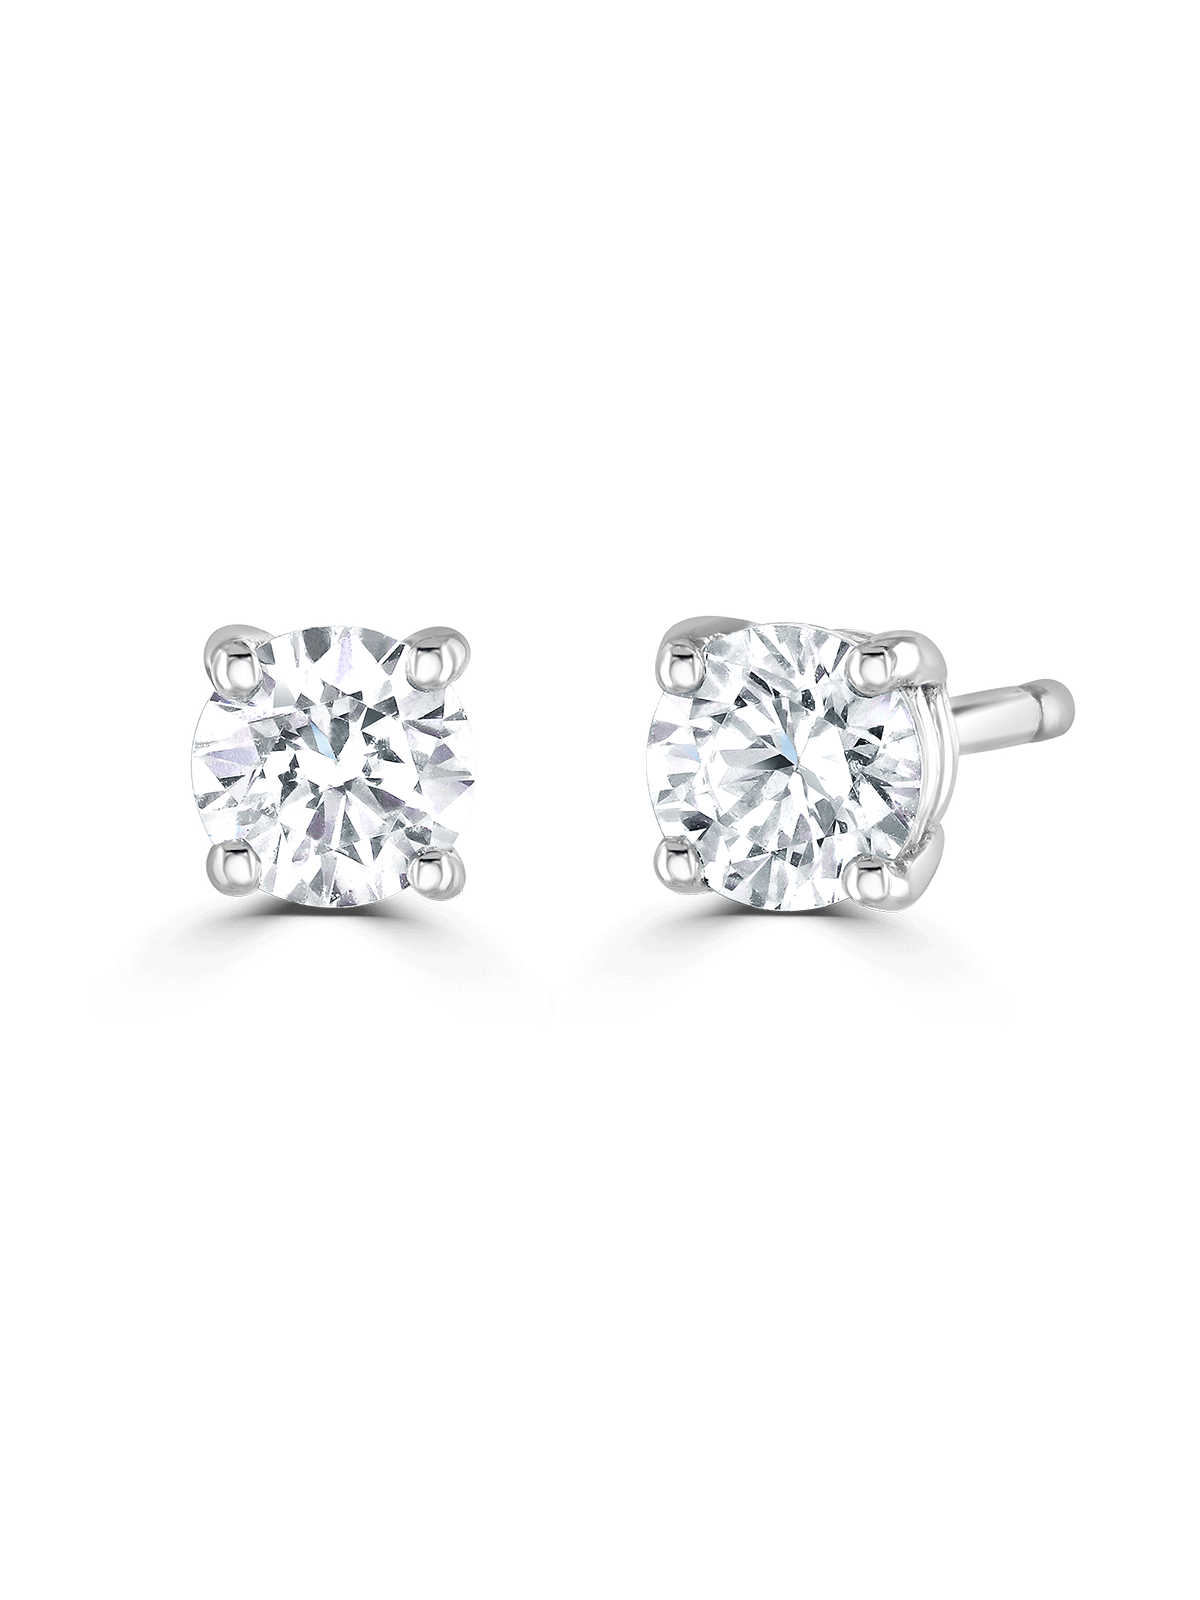 Brown & Newirth Rosie 0.40ct Brilliant Cut Diamond Solitaire Earrings in 9ct White Gold